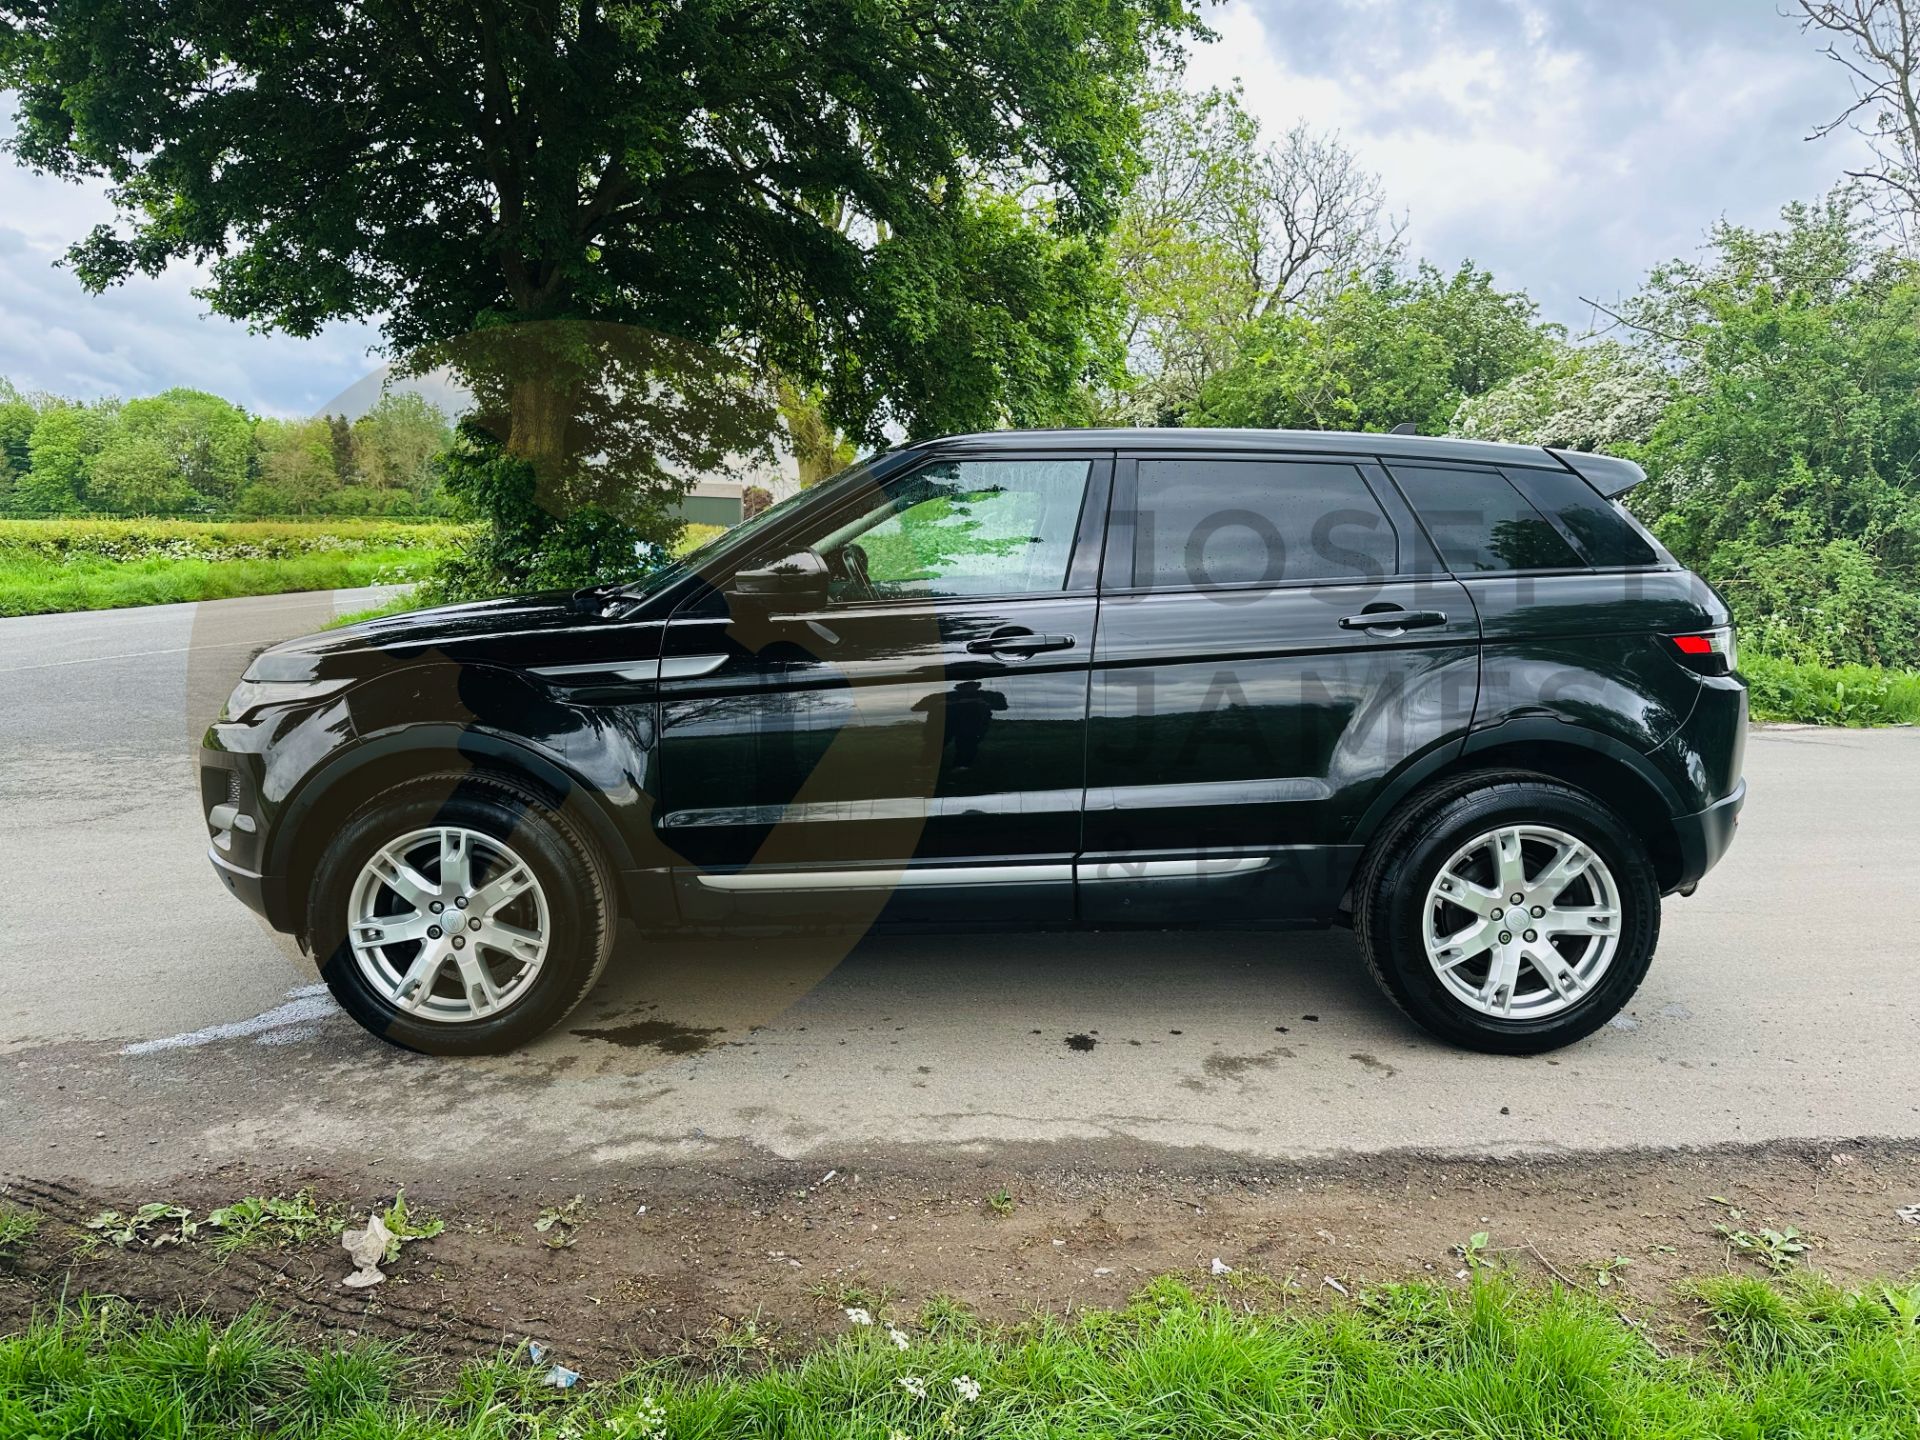 (ON SALE) RANGE ROVER EVOQUE 2.2 ED4 *PURE EDITION* - 2015 MODEL - START / STOP - LEATHER - Image 6 of 39